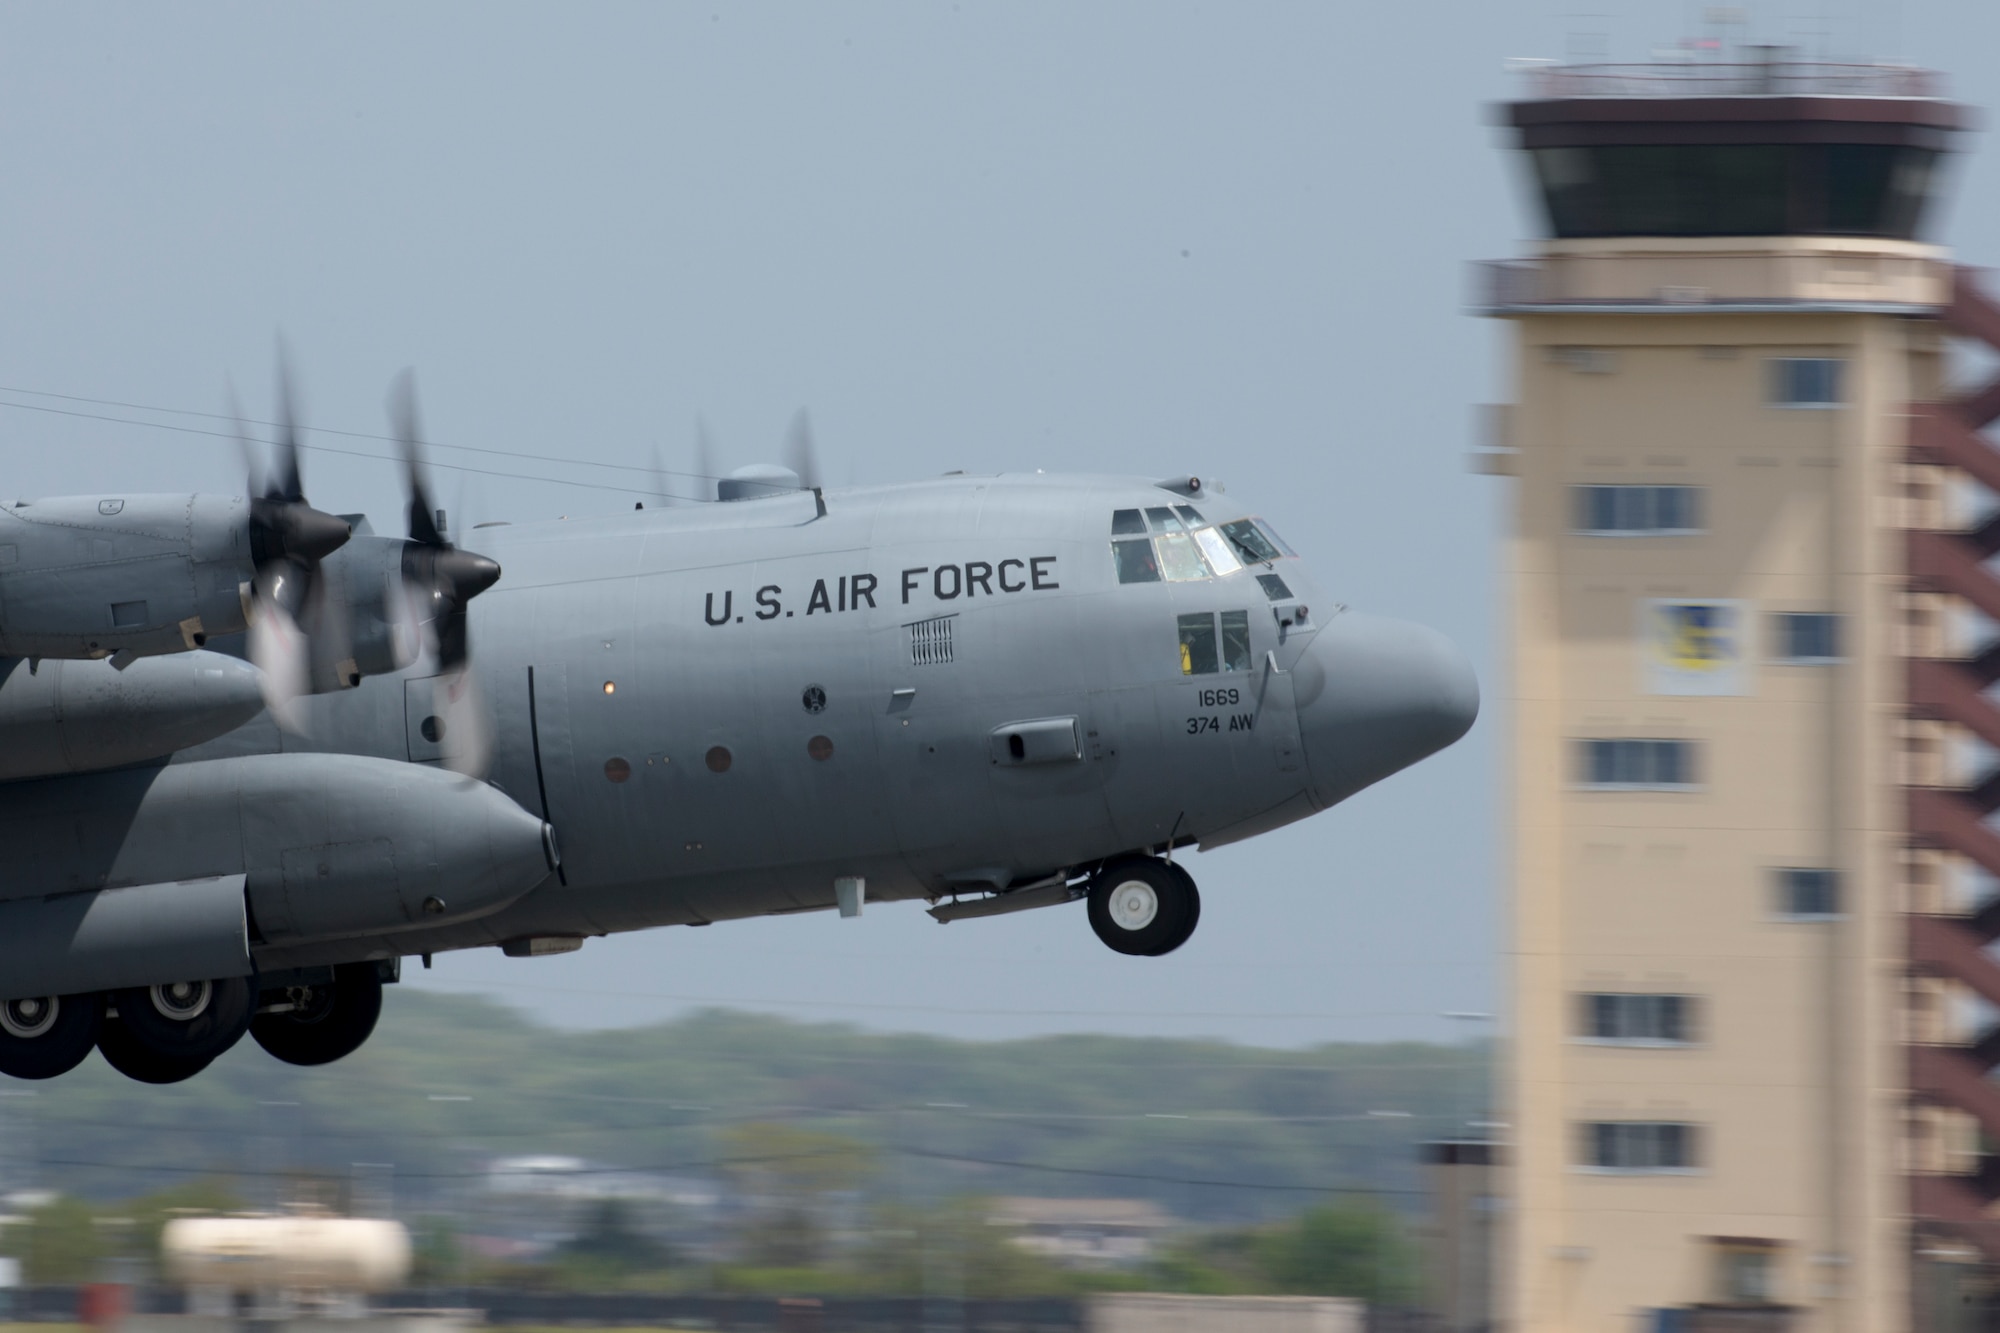 A C-130 Hercules takes off from Yokota Air Base, Japan, April 18, 2016. The 374th Airlift Wing sent two aircraft in support of the Government of Japan in their relief efforts for the series of earthquakes that took place in the Kyushu region recently. The aircraft transported heavy vehicles and personnel from Chitose Air Base, Hokkaido to Kyushu. (U.S. Air Force photo by Yasuo Osakabe/Released)